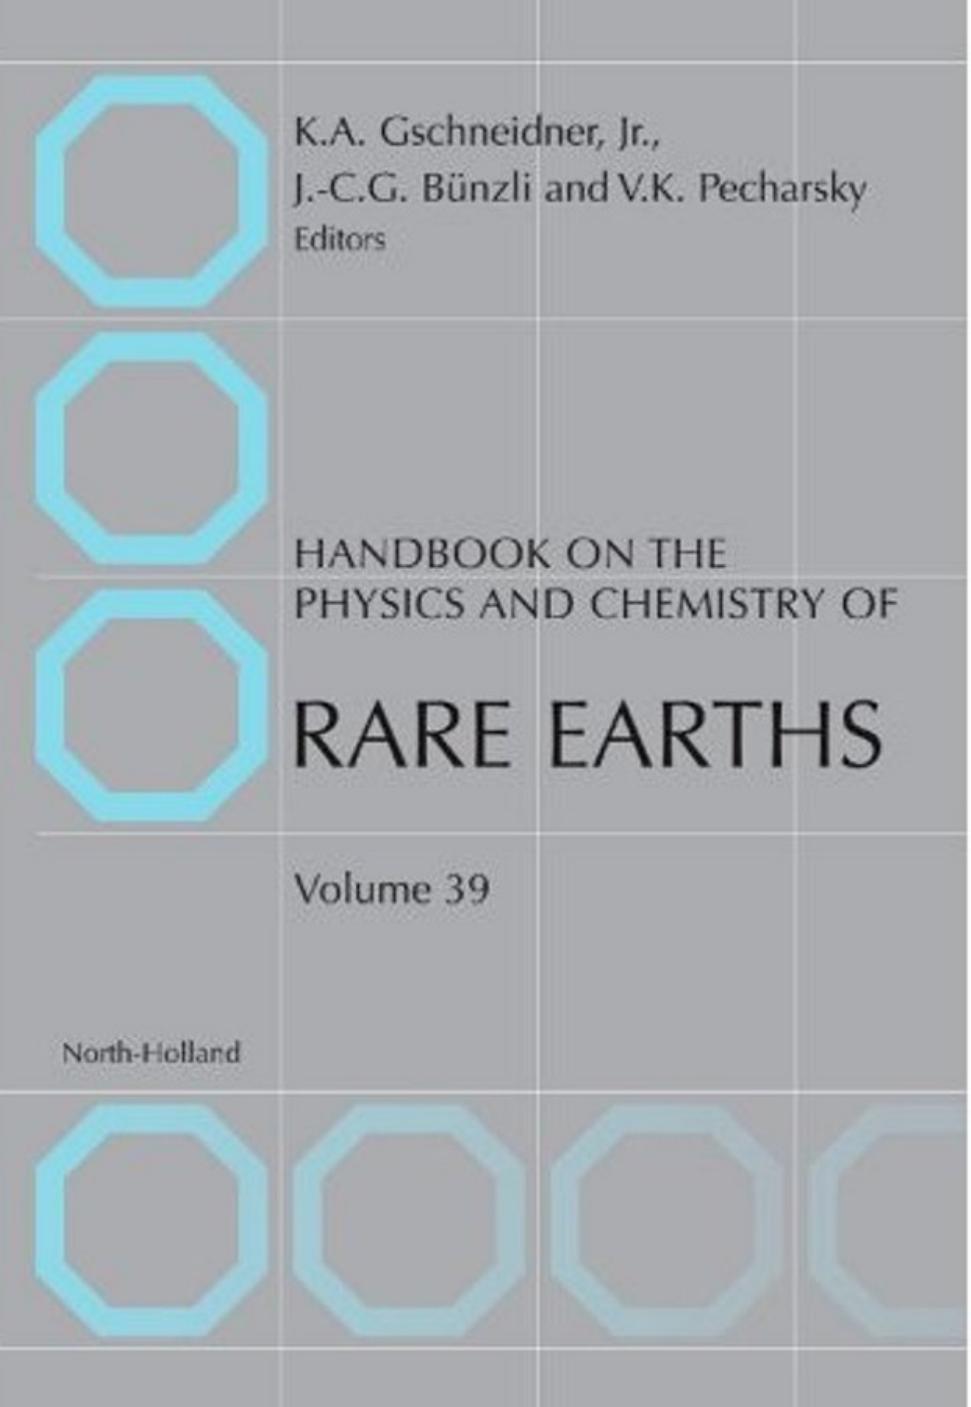 Handbook on the Physics and Chemistry of Rare Earths 2009.pdf